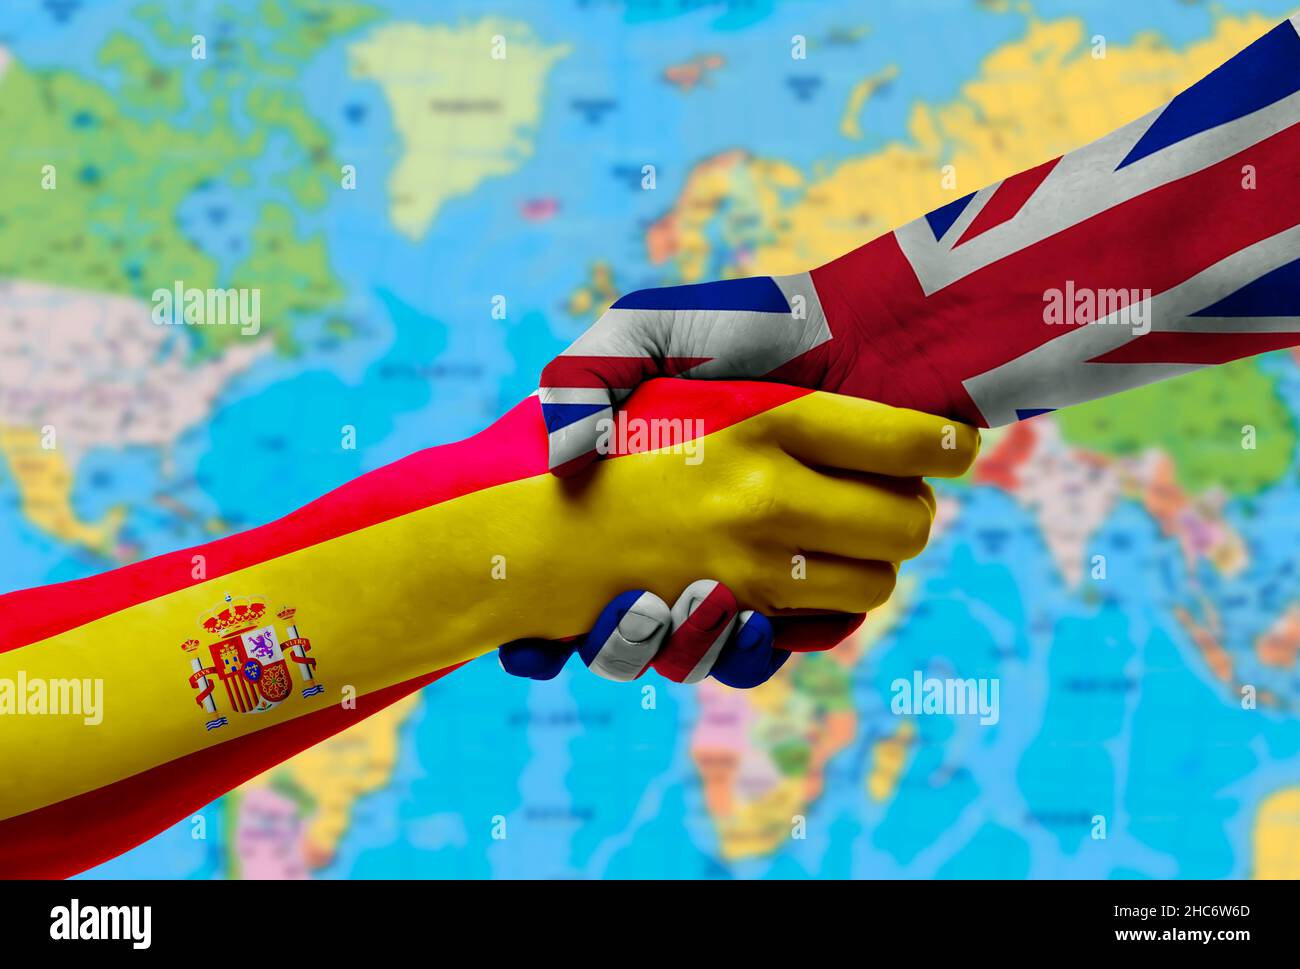 Flags Spain and the United Kingdom countries, handshake cooperation, partnership and friendship or sports competition.With background of world map Stock Photo